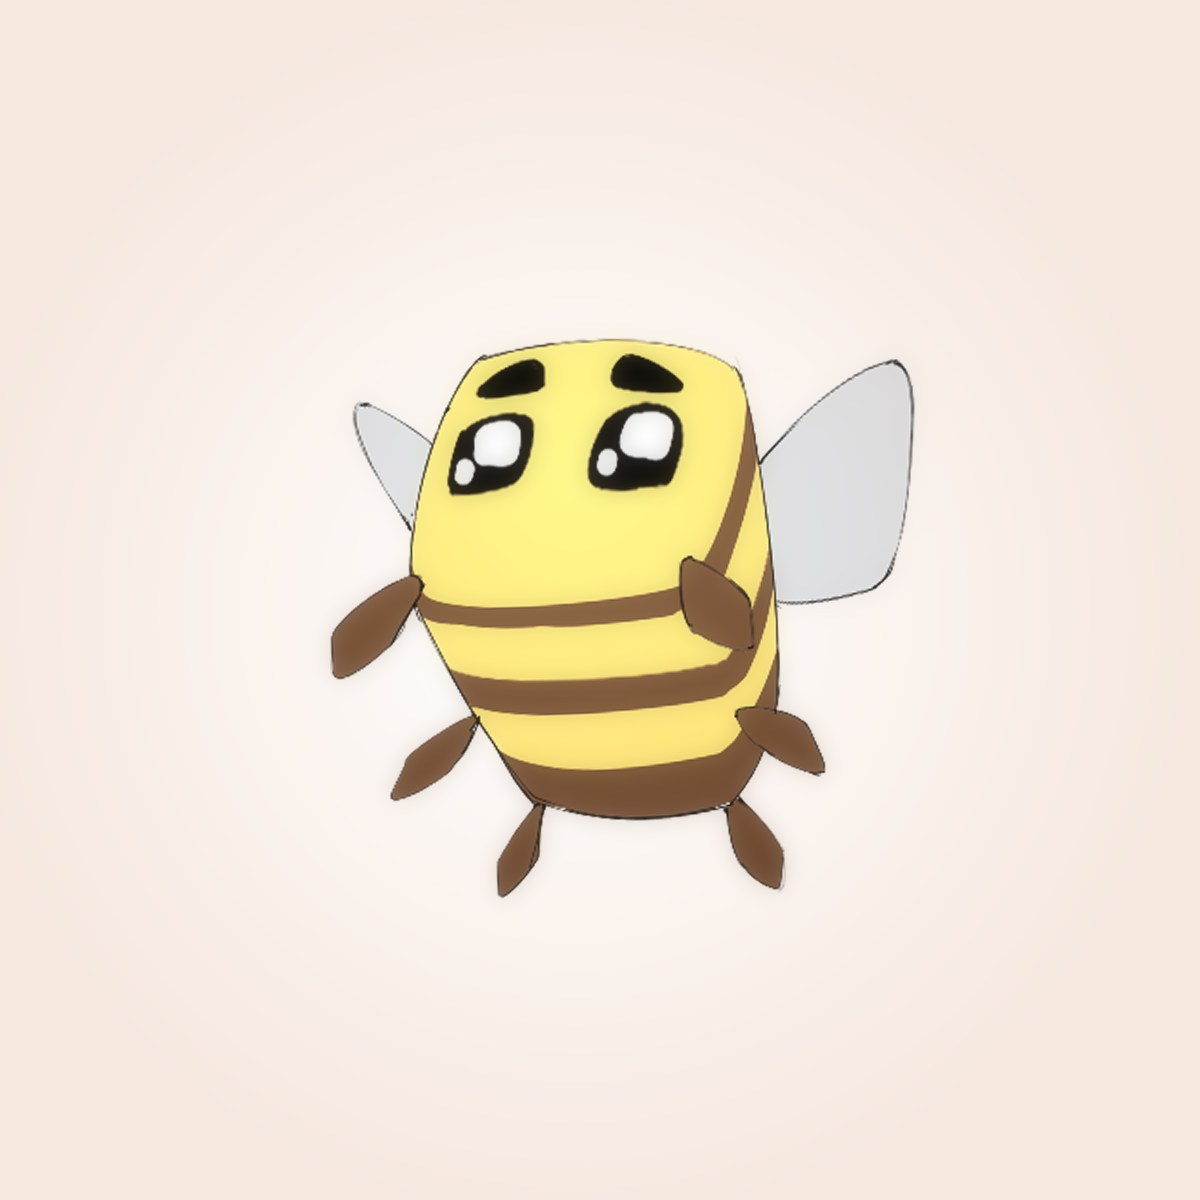 16 submissions. minecraft bee fan art. 